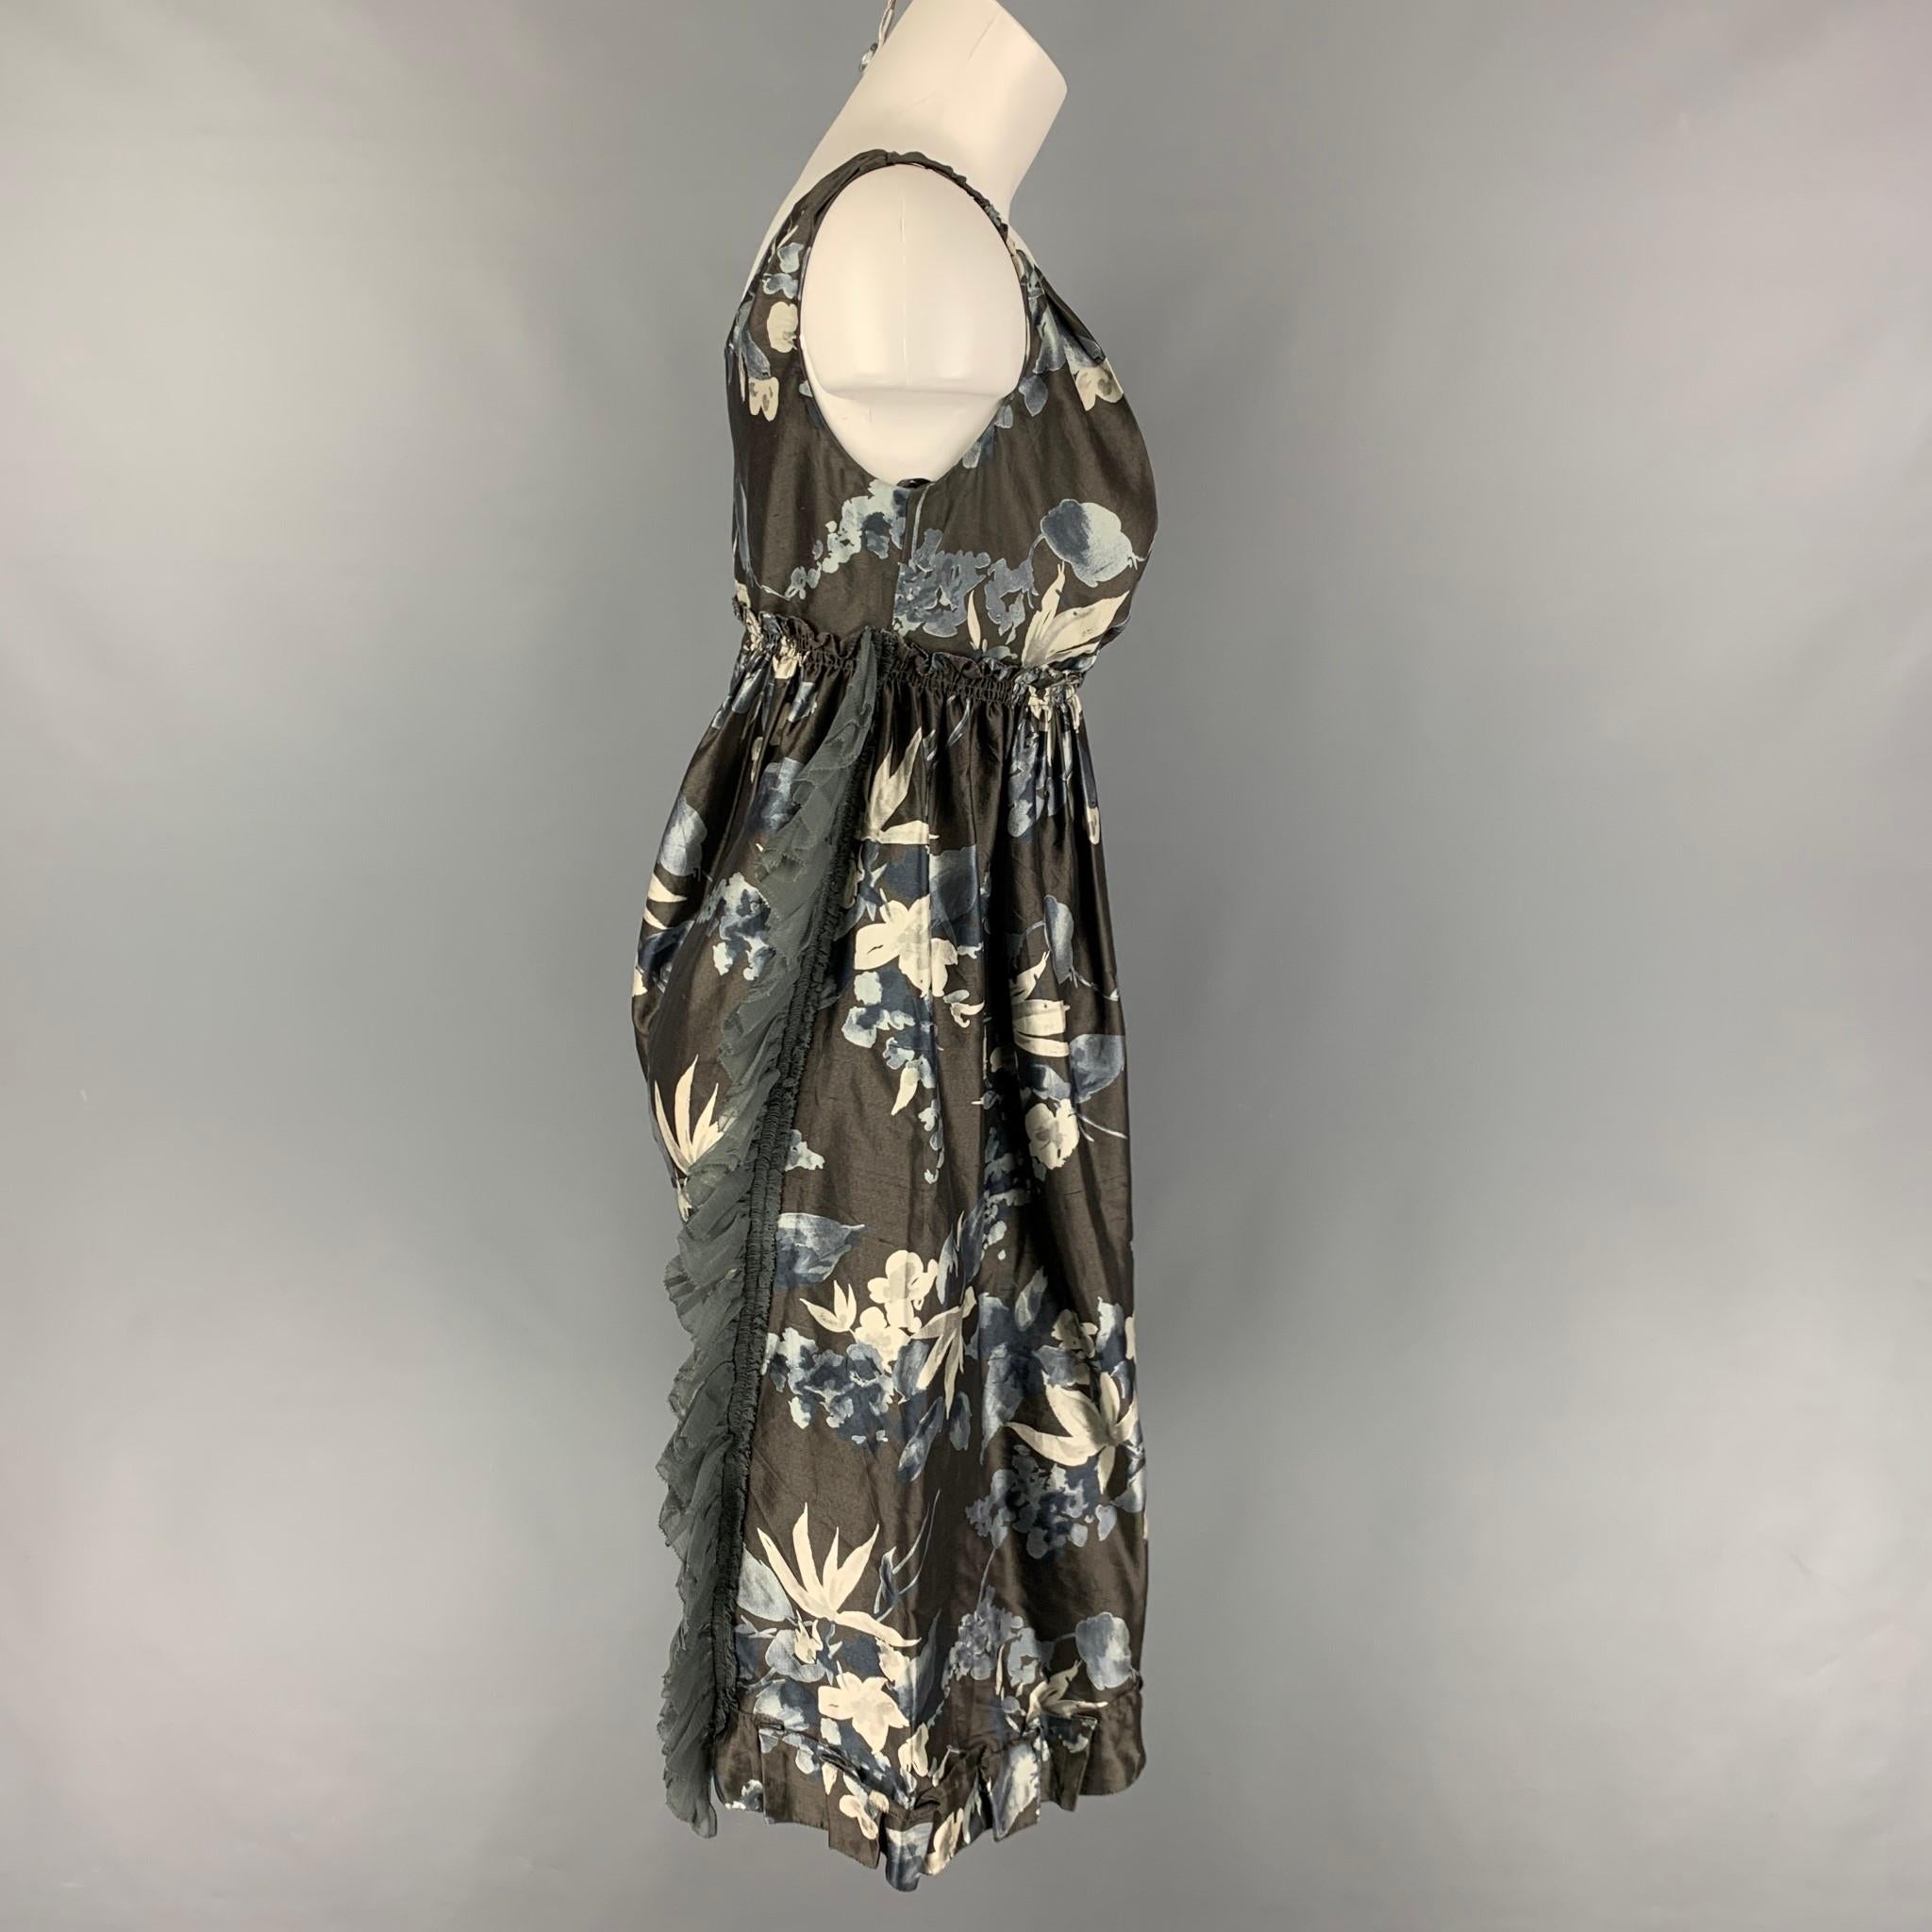 VERA WANG dress comes in a slate & cream floral silk featuring an a-line style, elastic detail, ruffled detail, and a side zipper closure. Made in USA.

Very Good Pre-Owned Condition.
Marked: 4

Measurements:

Bust: 31 in.
Waist: 28 in.
Hip: 36